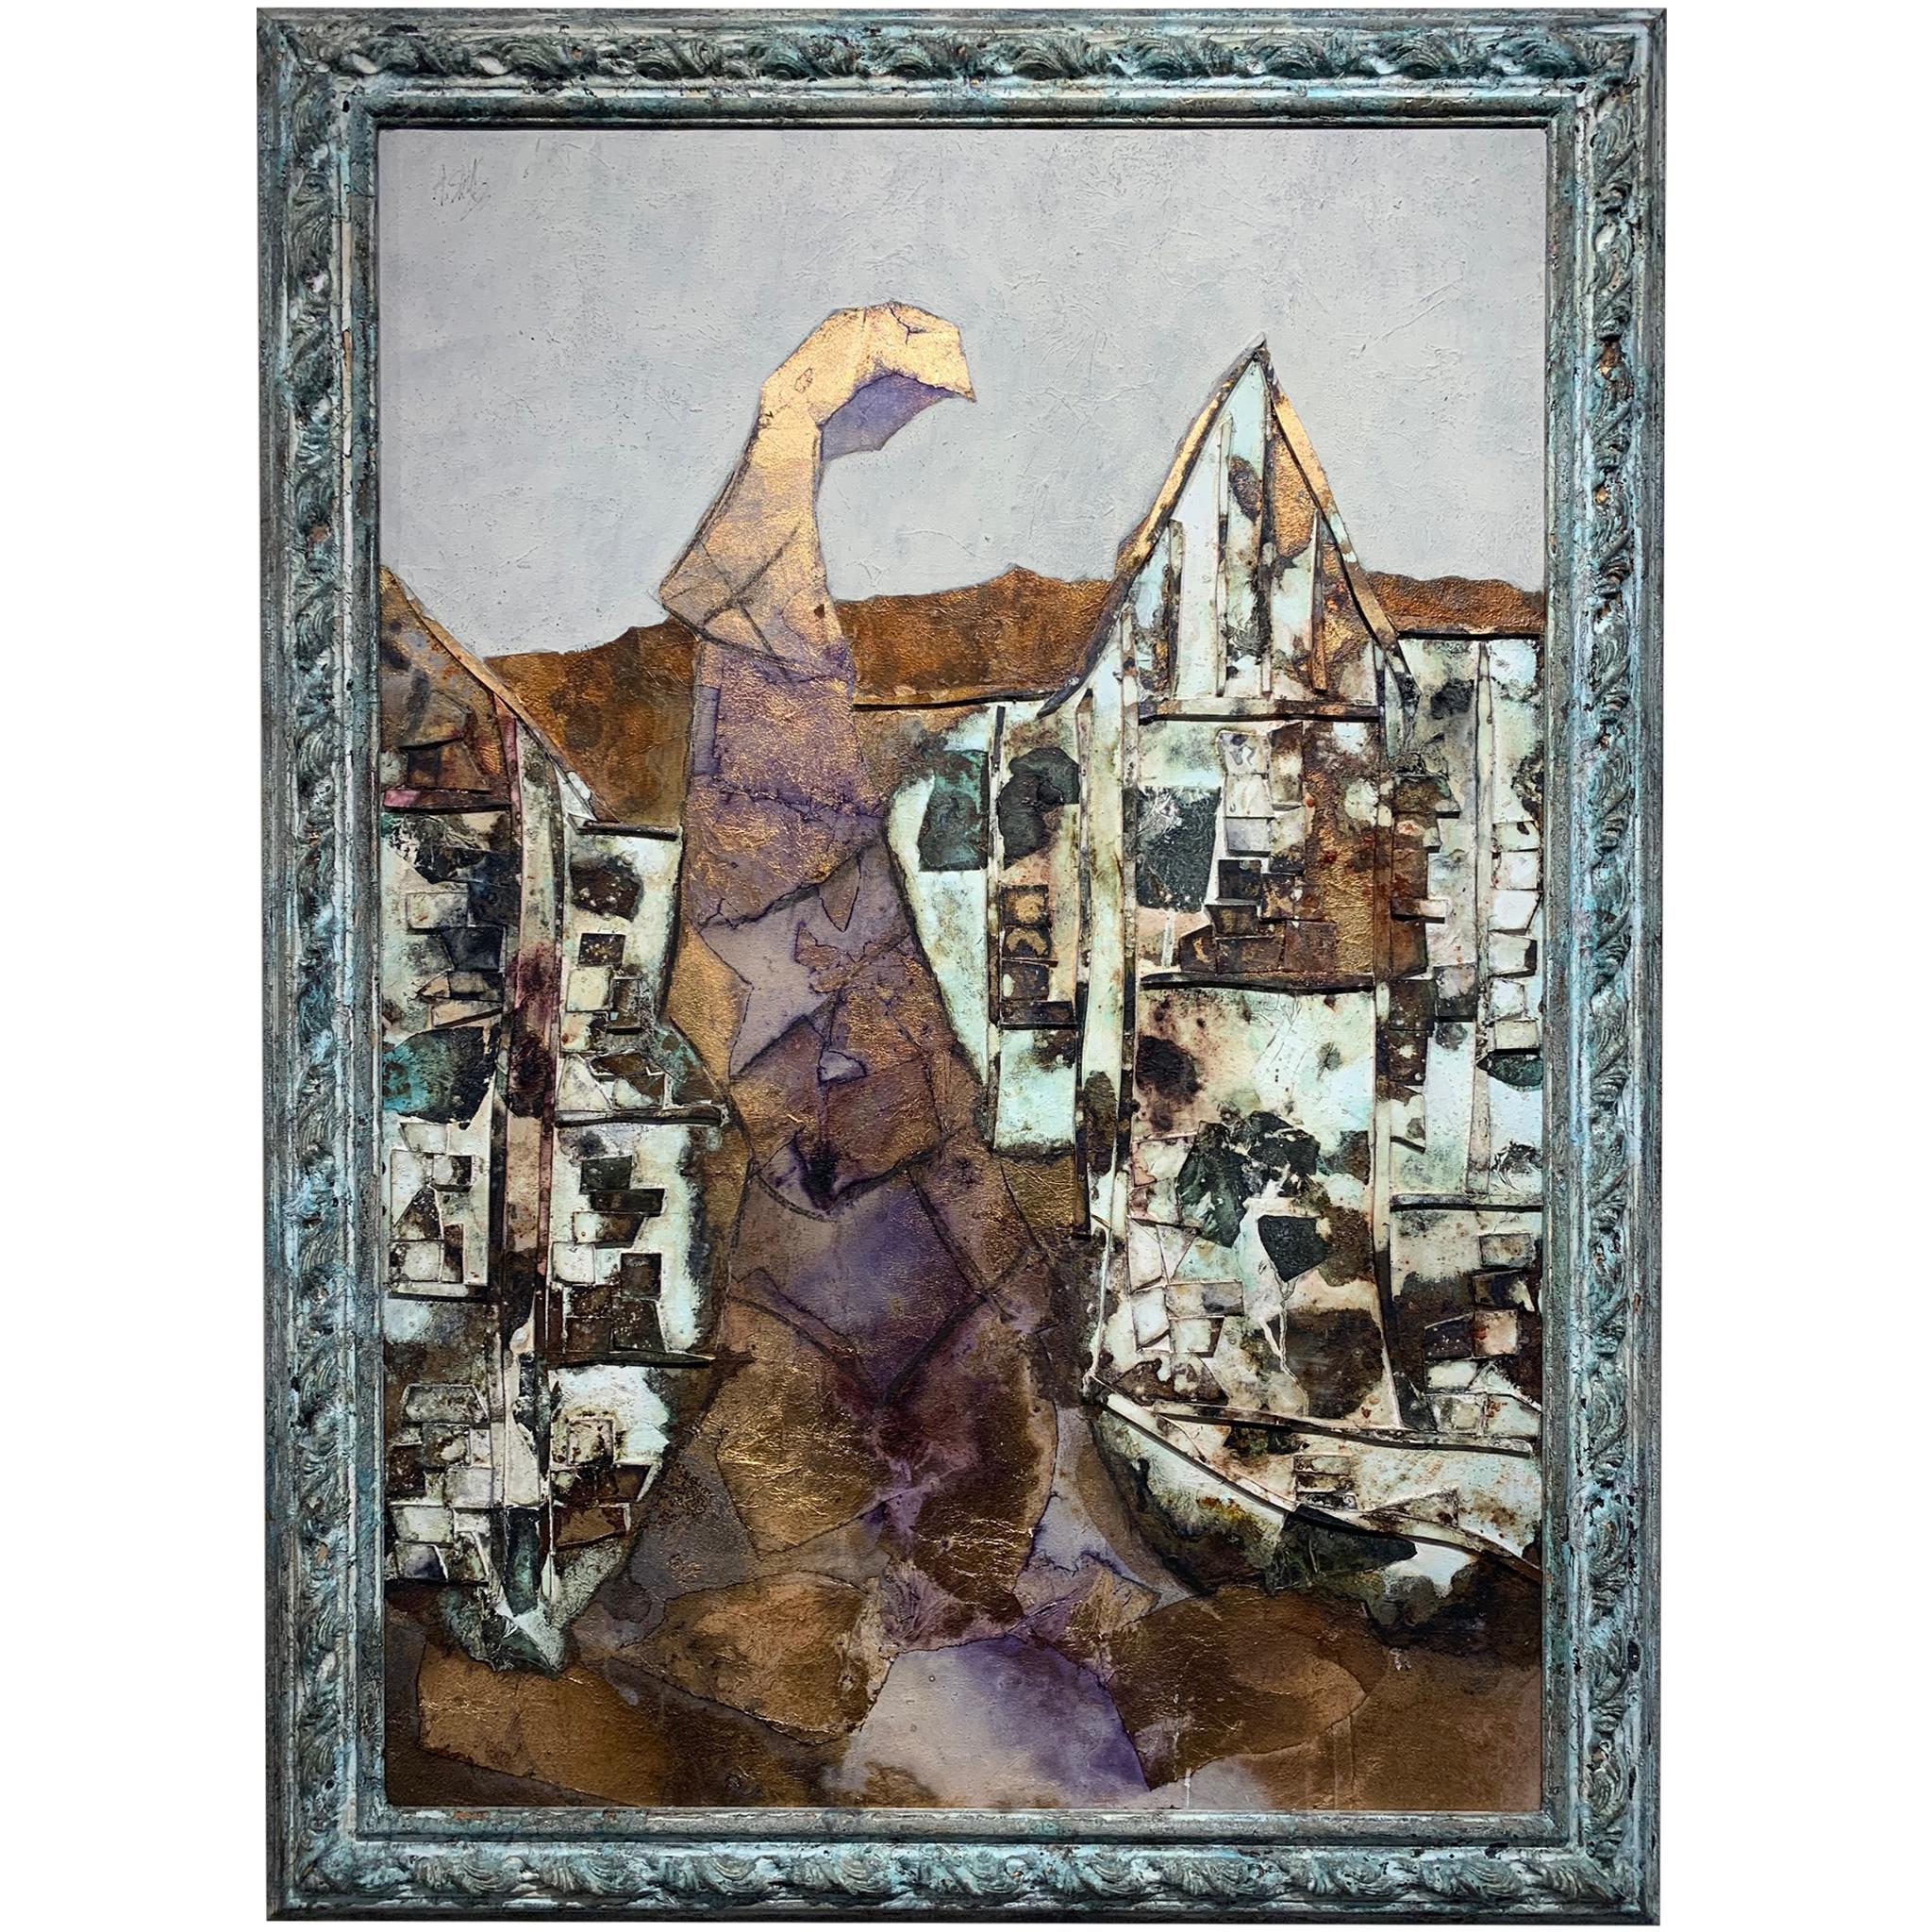 Woman of The Village -Andrea Stella-Figurative Abstract Painting-Mixed Media - Contemporary Mixed Media Art by ANDREA STELLA